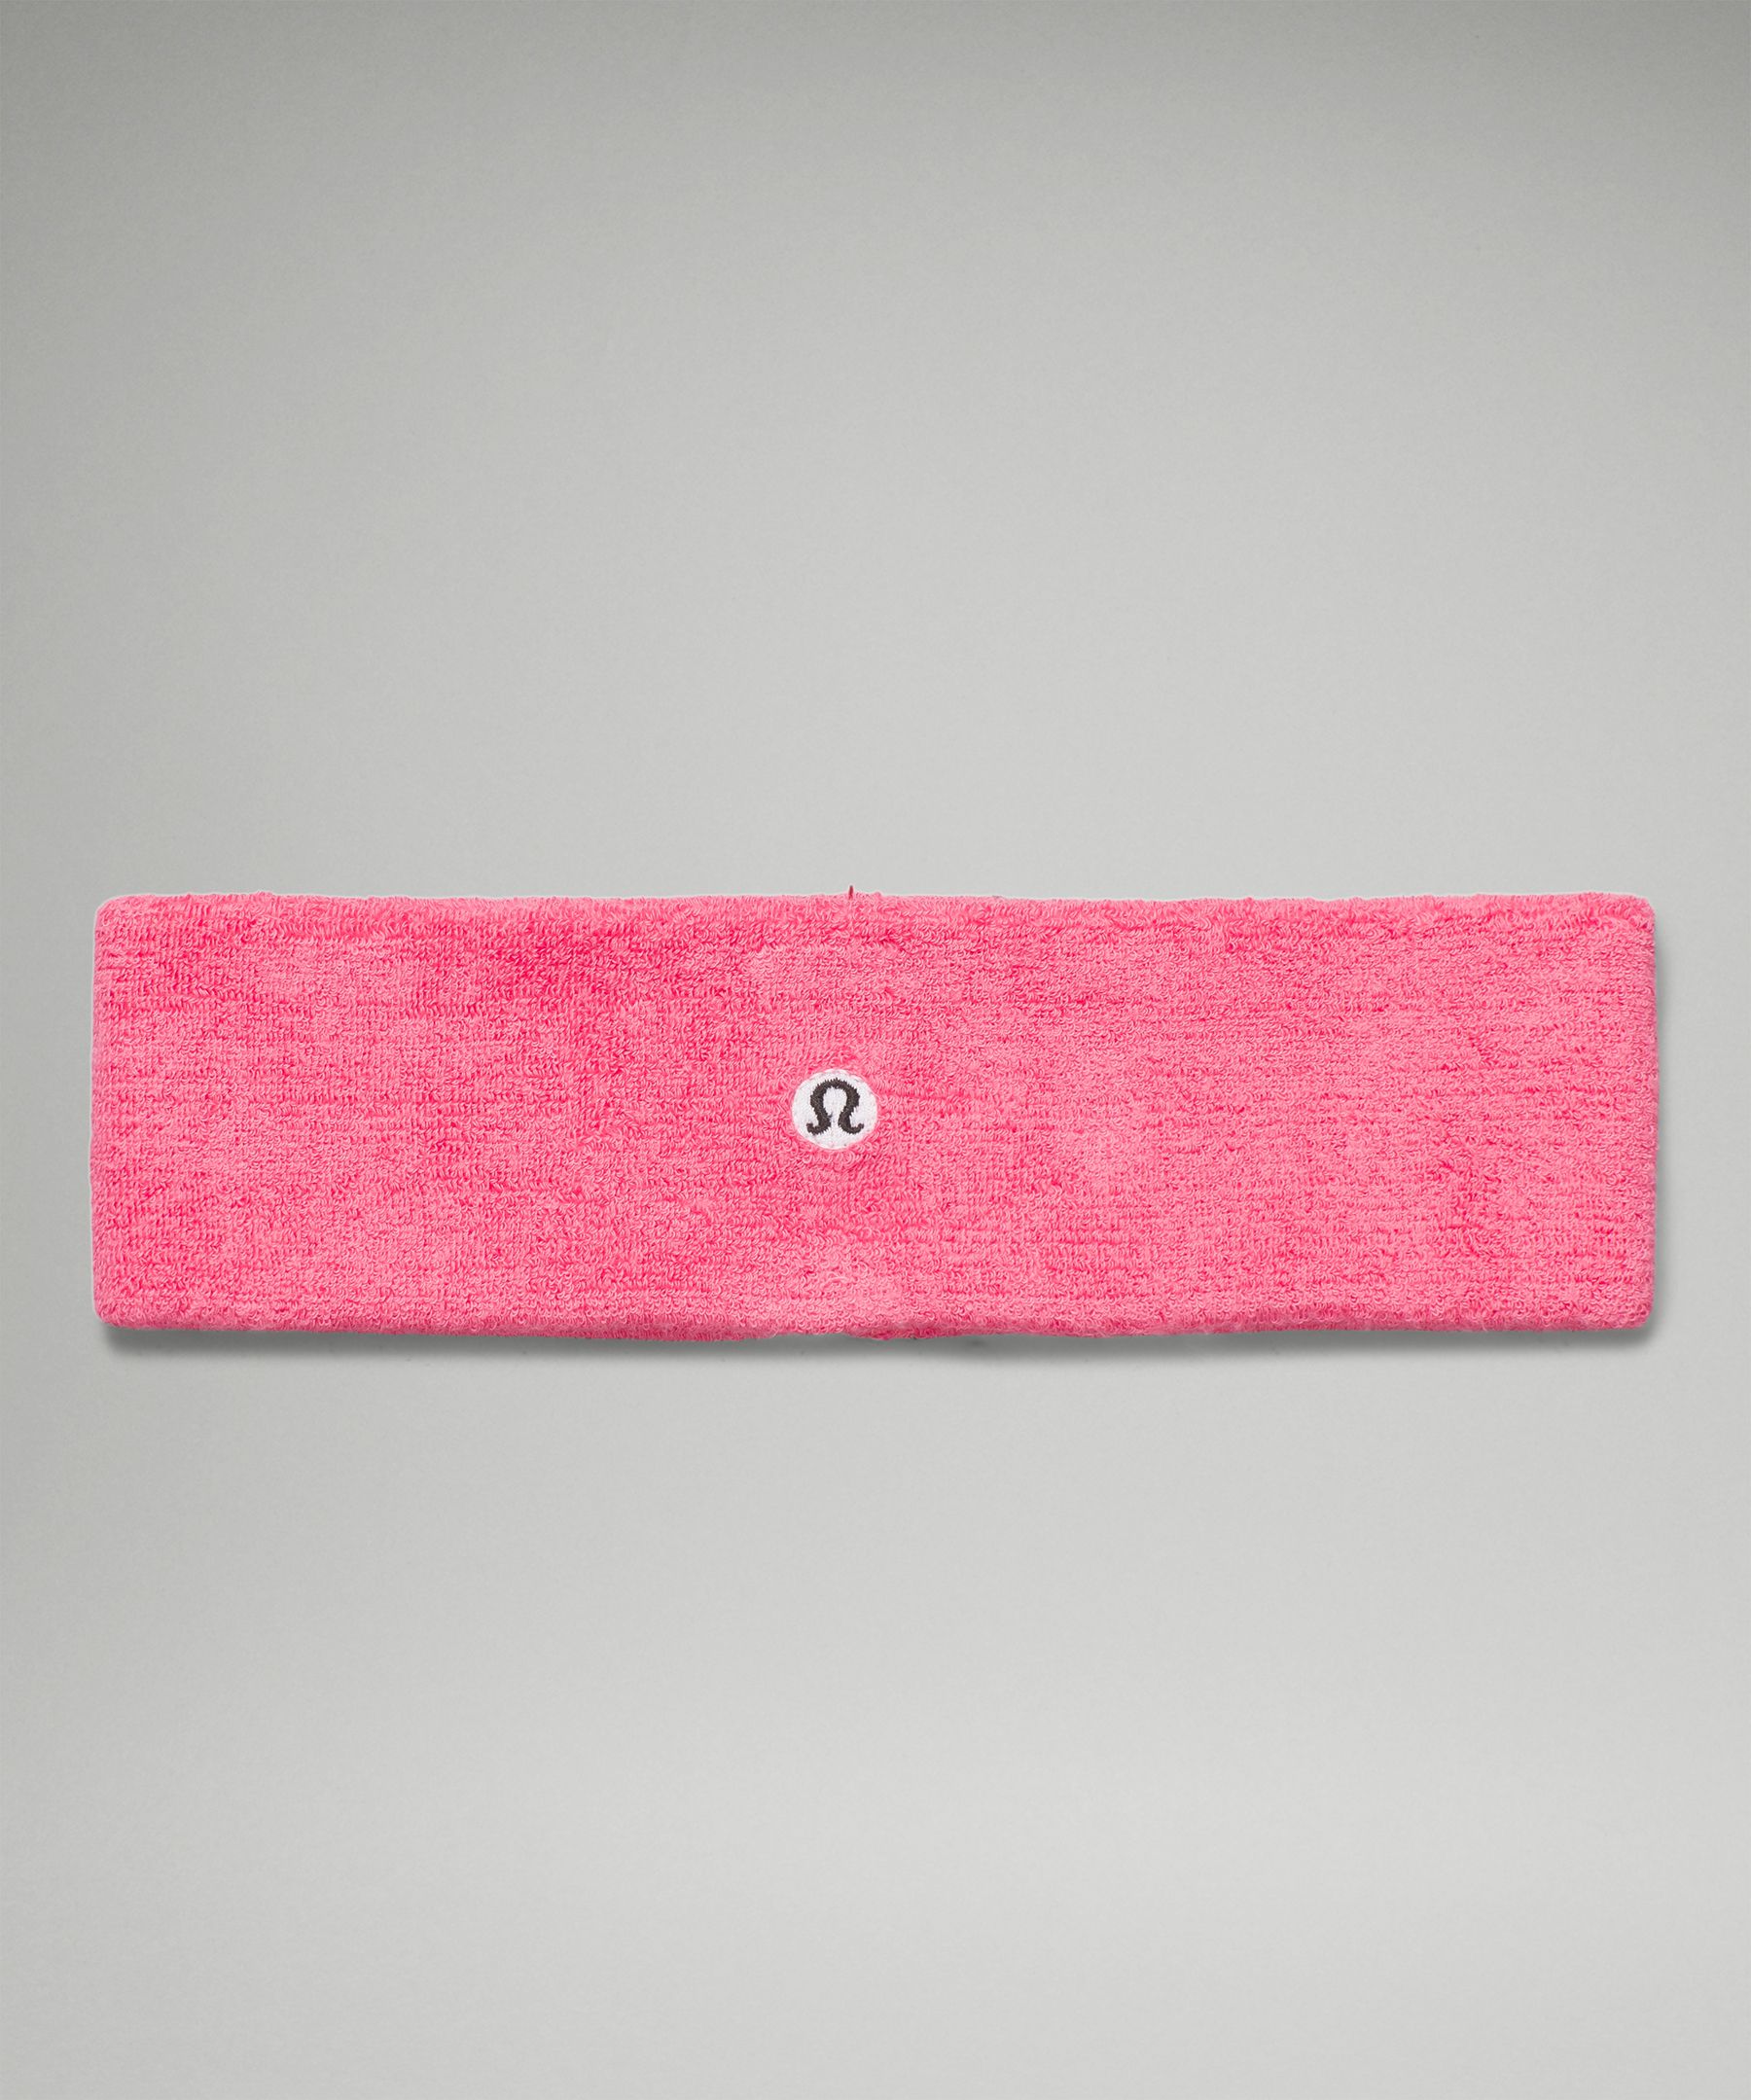 Lululemon Cotton Terry Sweatband In Guava Pink